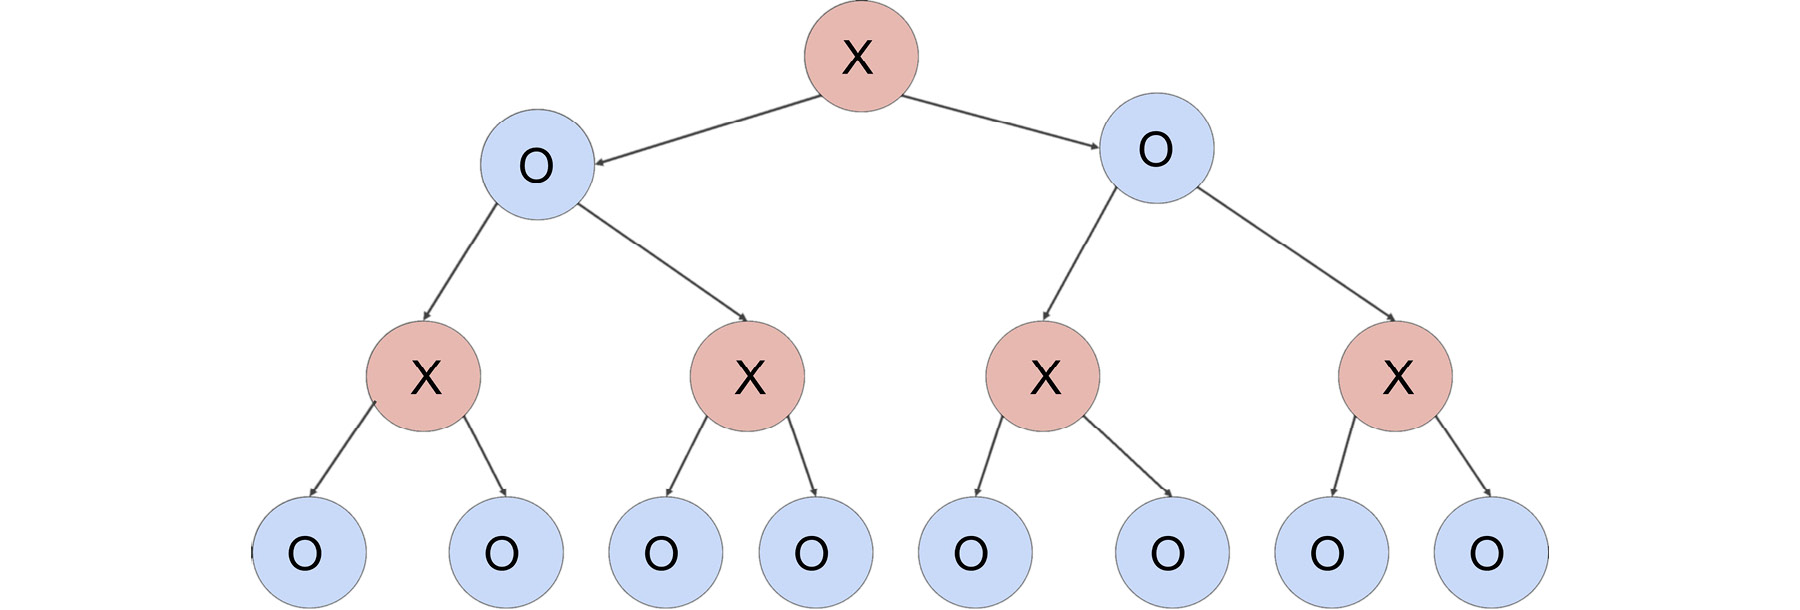 Figure 2.8 Example of search tree up to a certain depth